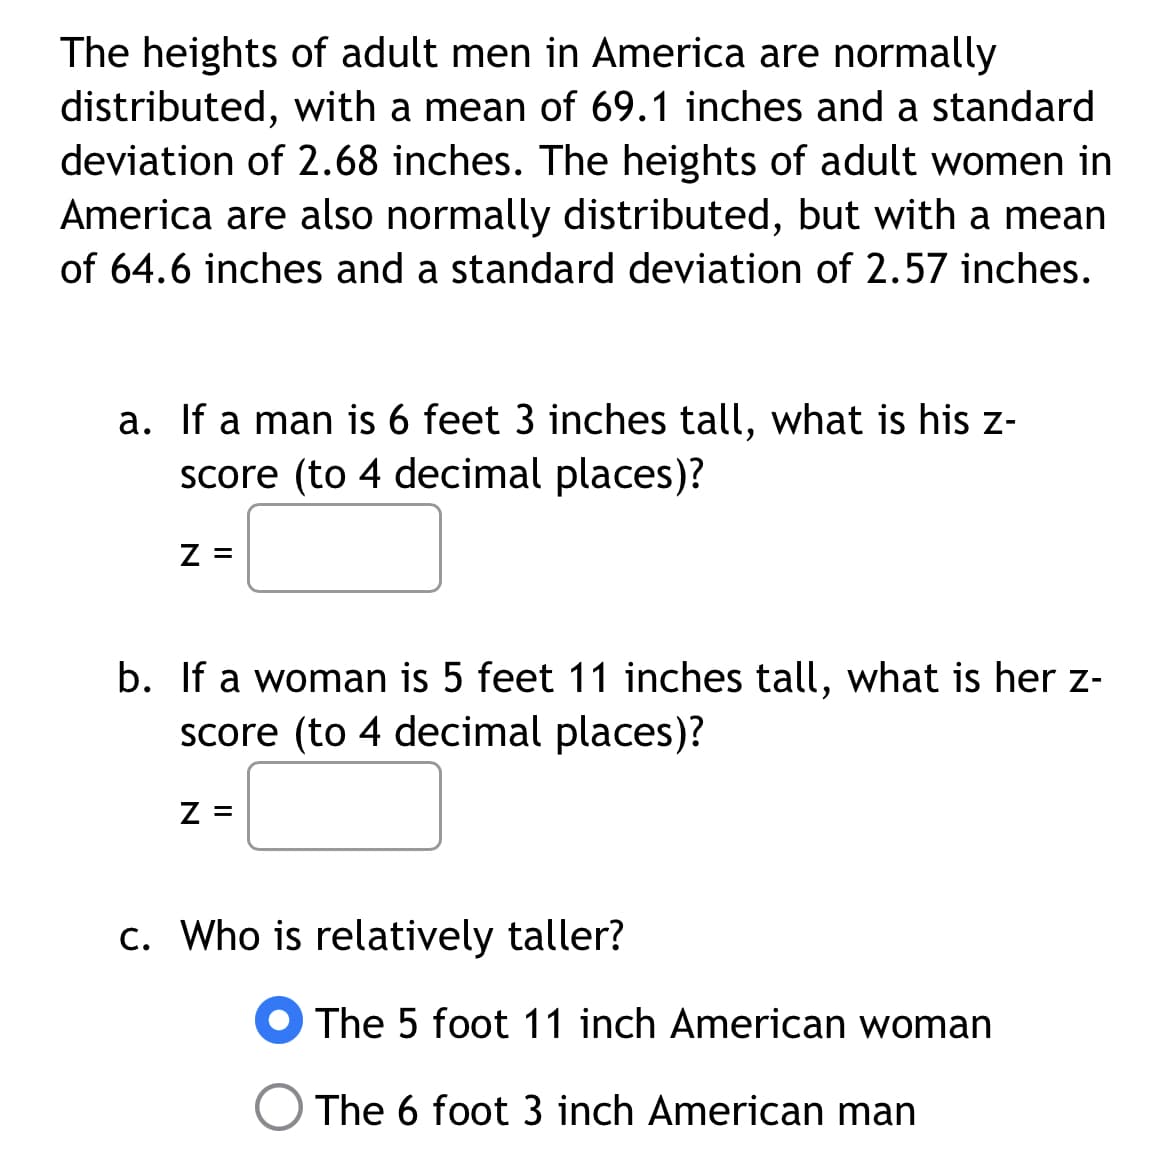 The heights of adult men in America are normally
distributed, with a mean of 69.1 inches and a standard
deviation of 2.68 inches. The heights of adult women in
America are also normally distributed, but with a mean
of 64.6 inches and a standard deviation of 2.57 inches.
a. If a man is 6 feet 3 inches tall, what is his z-
score (to 4 decimal places)?
Z =
b. If a woman is 5 feet 11 inches tall, what is her z-
score (to 4 decimal places)?
Z =
c. Who is relatively taller?
The 5 foot 11 inch American woman
The 6 foot 3 inch American man
